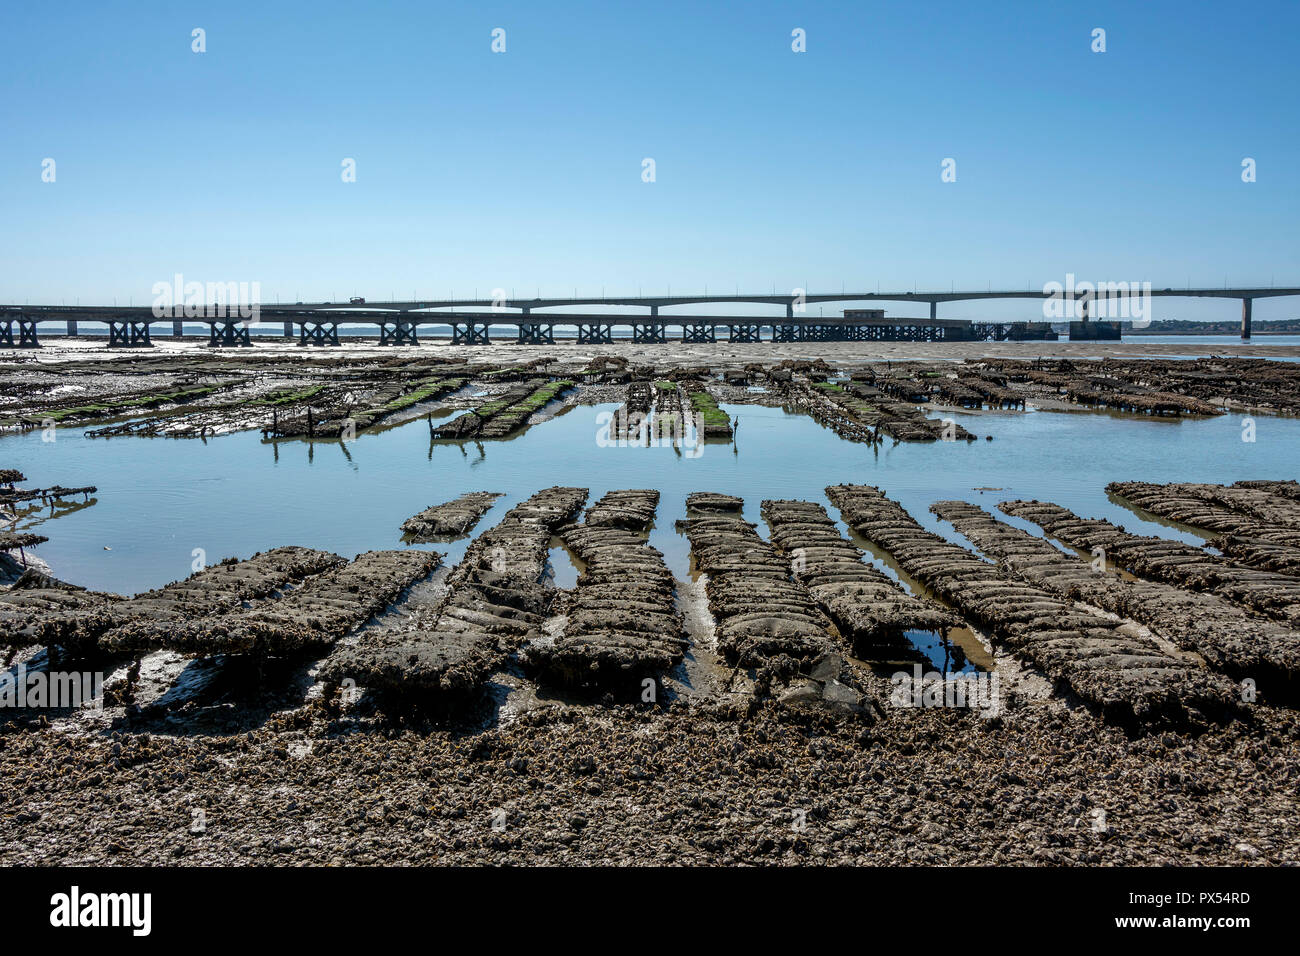 Oyster beds and Oleron bridge, Charente Maritime, Nouvelle-Aquitaine, france Stock Photo